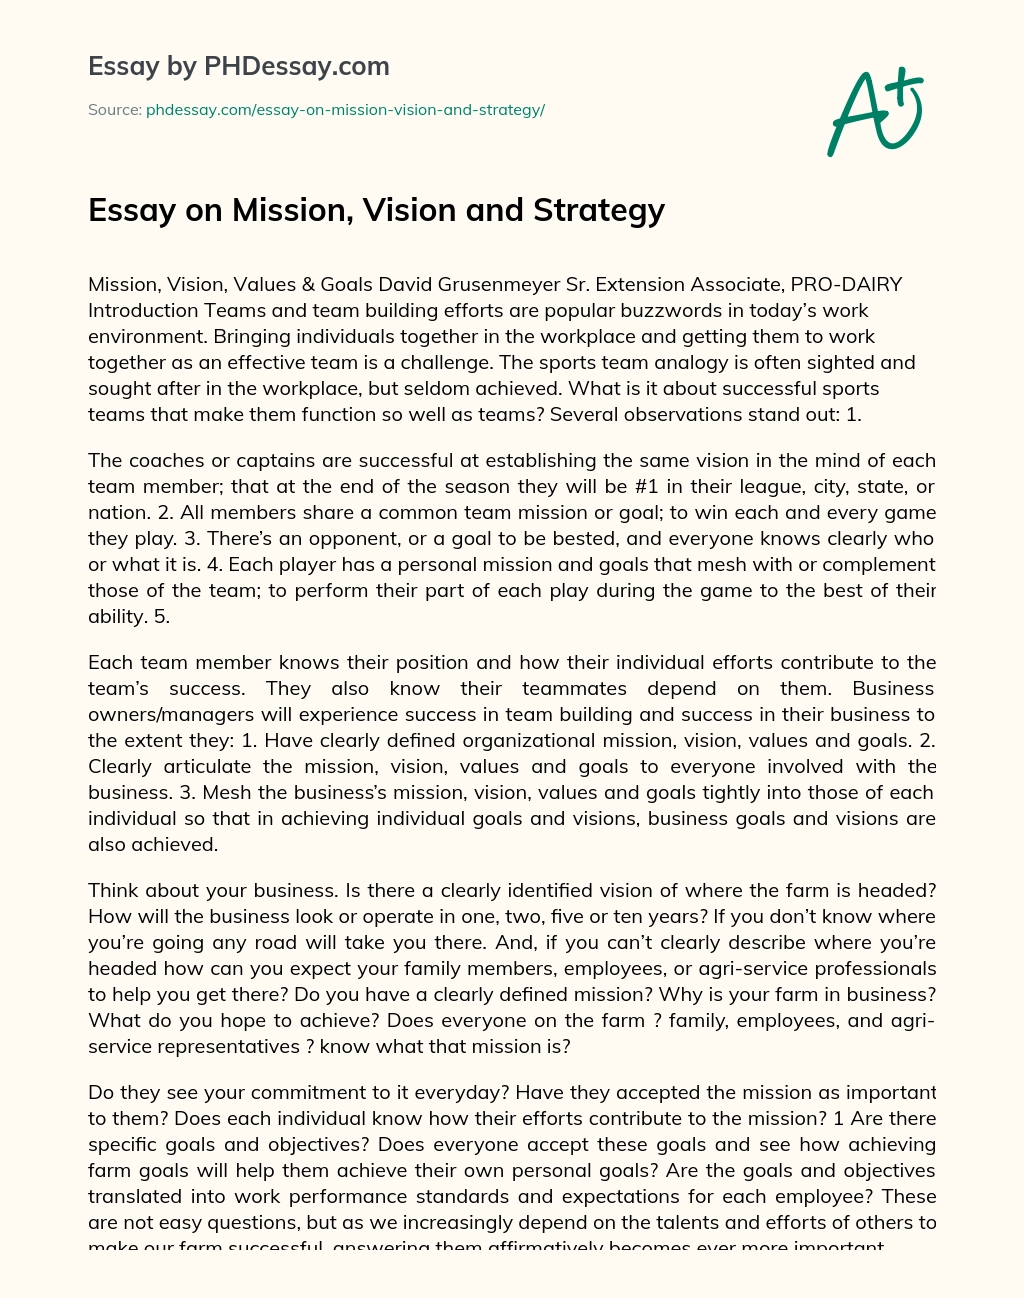 Essay on Mission, Vision and Strategy essay